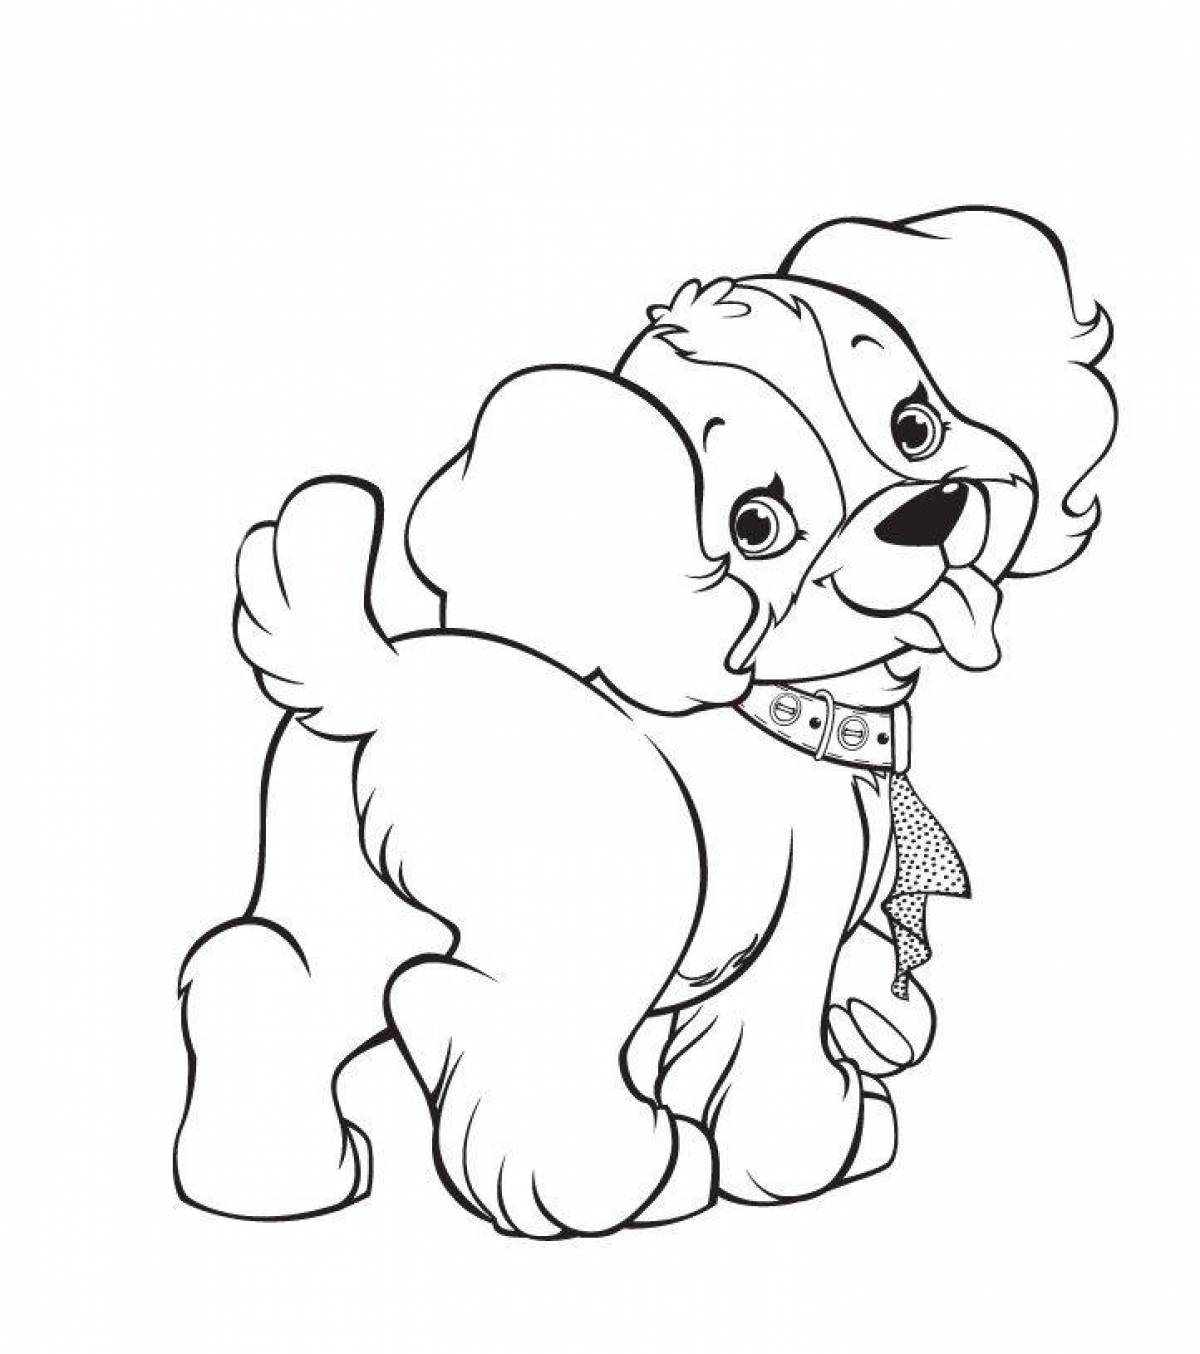 Snuggly doggie coloring page